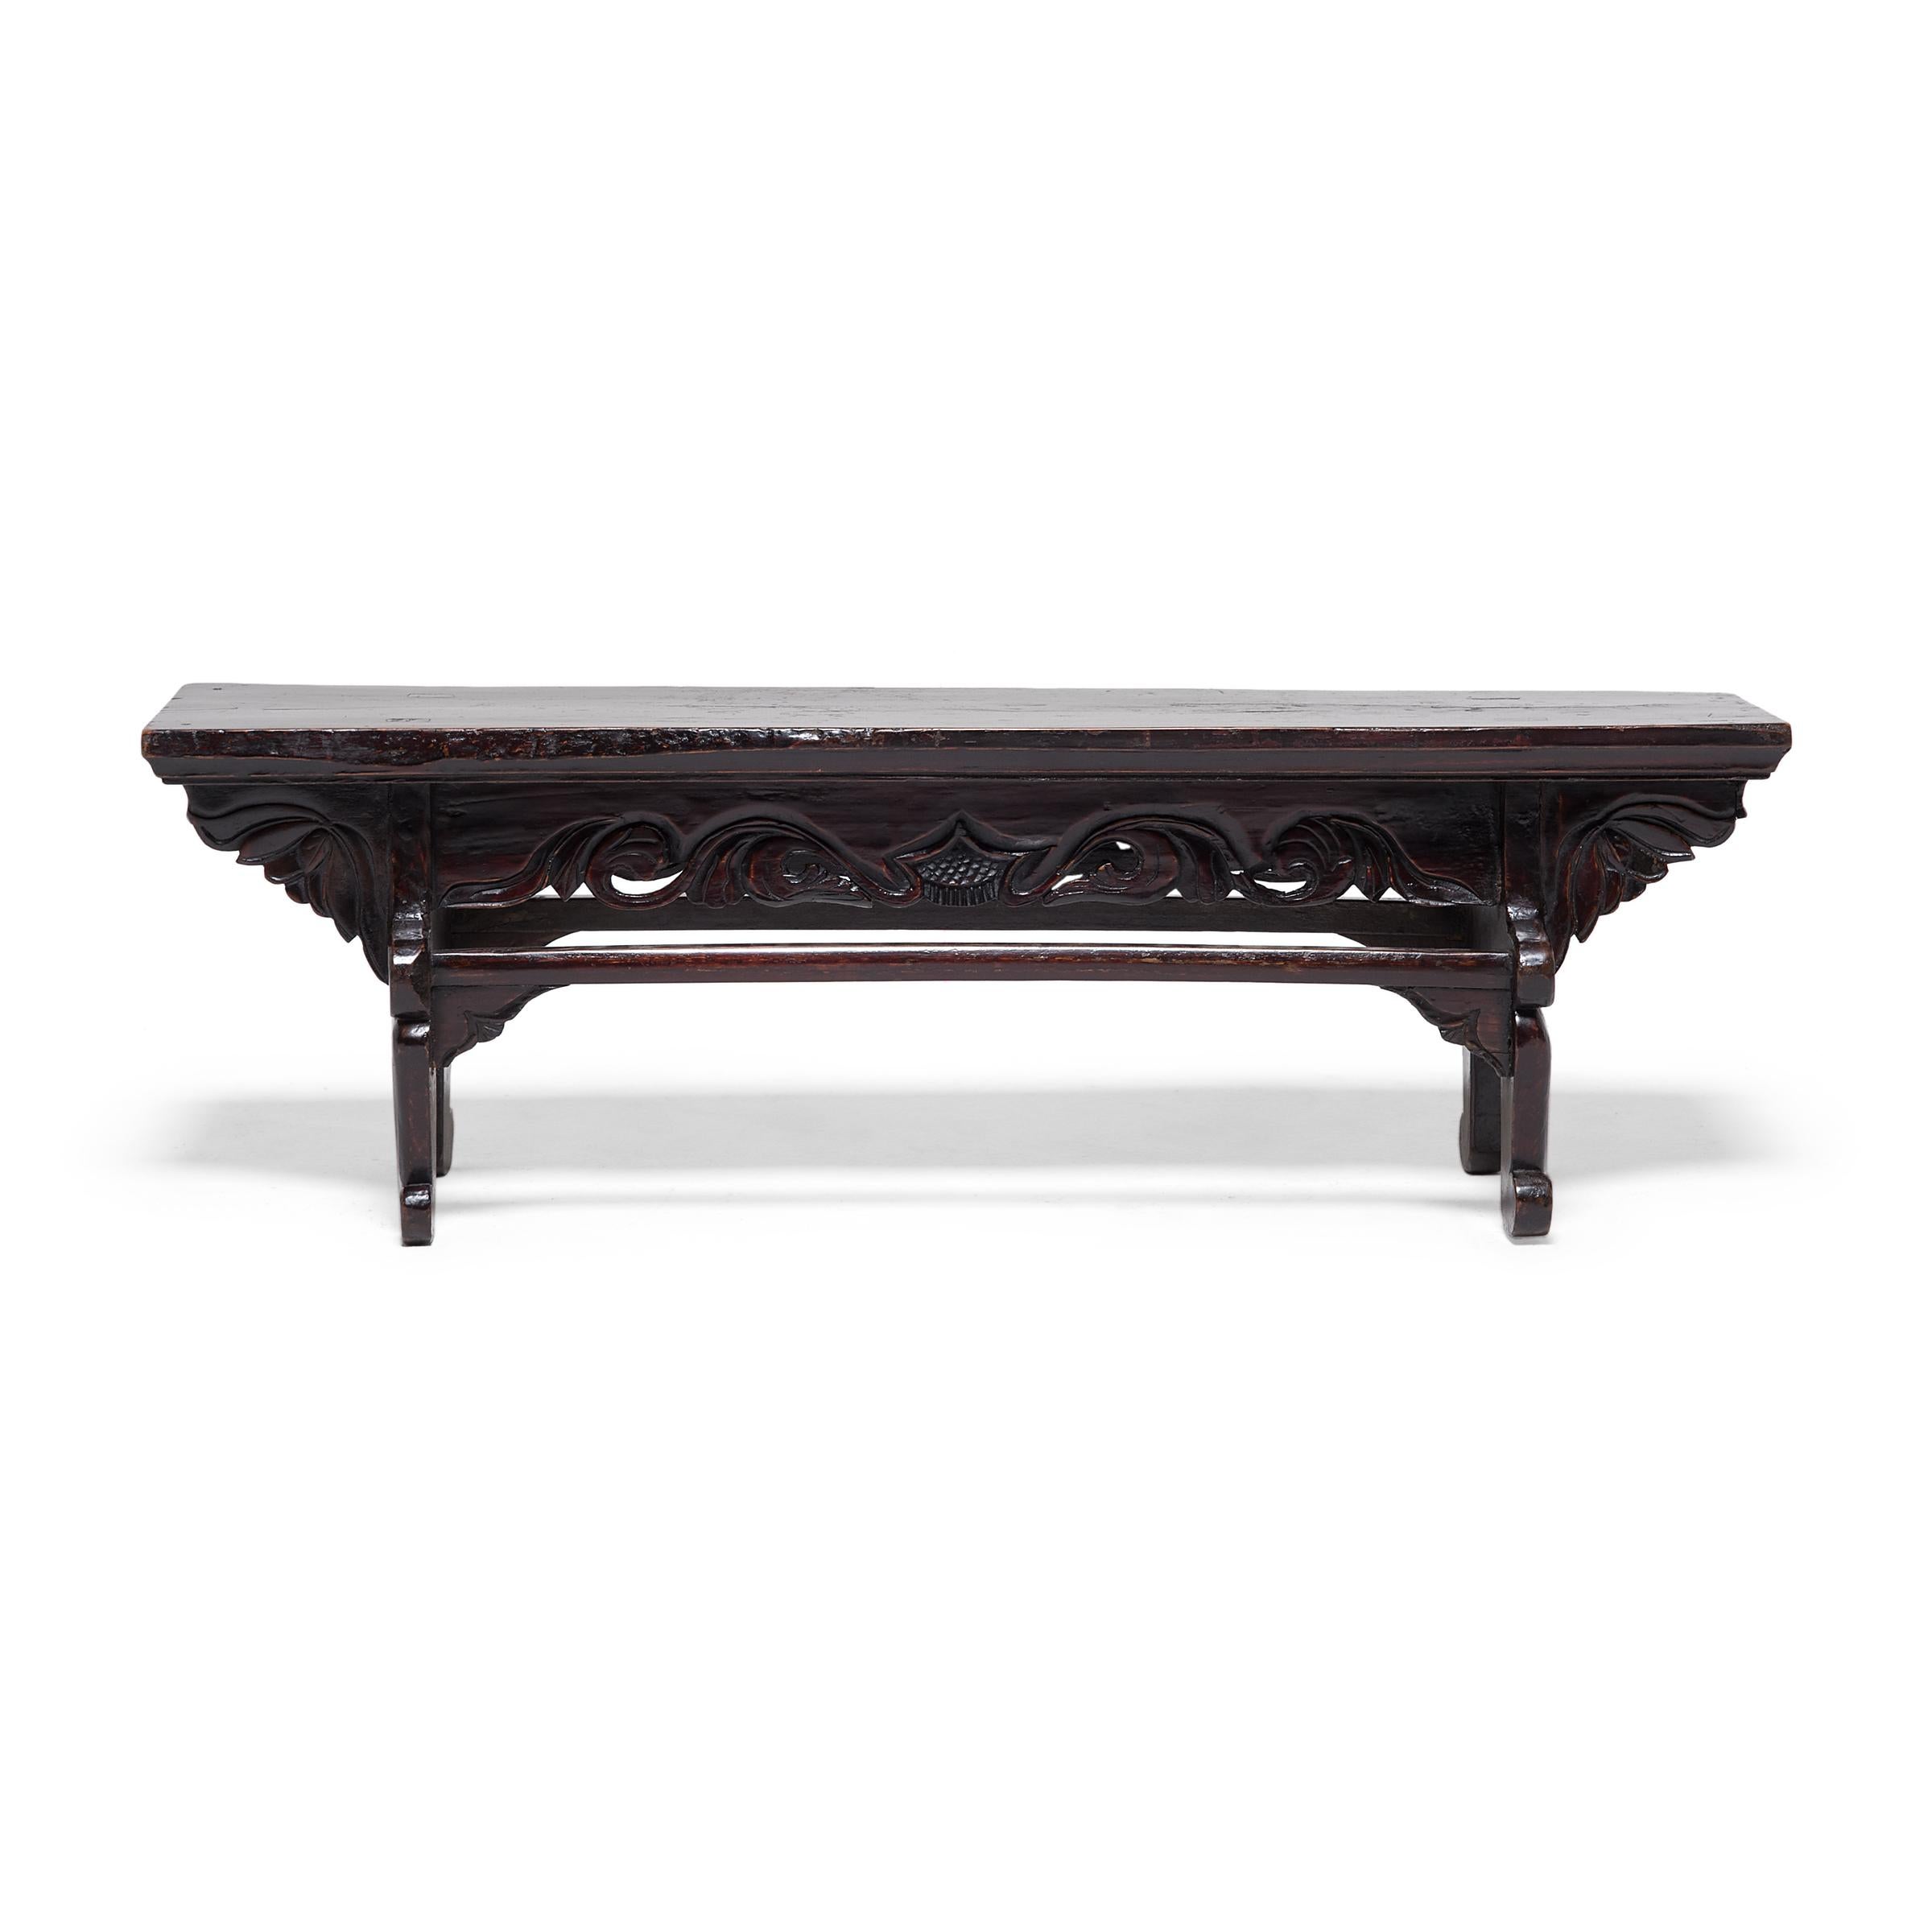 This low 19th-century table is actually a step used for easily getting in and out of a raised daybed. Crafted of northern elmwood (yumu), the step features a plank top surface, carved lotus spandrels, and a prominent apron carved with floral